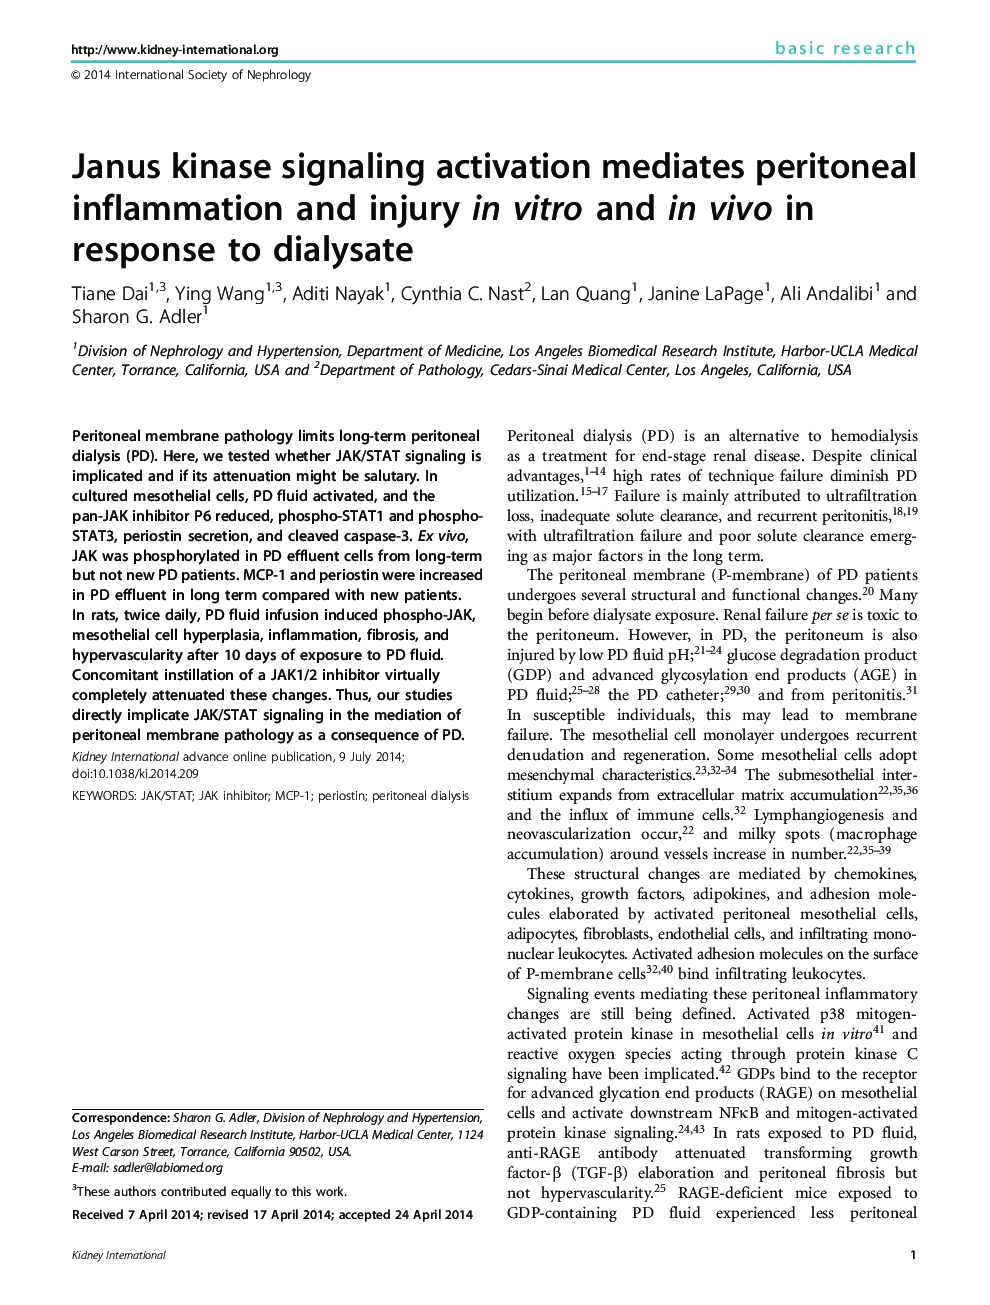 Janus kinase signaling activation mediates peritoneal inflammation and injury in vitro and in vivo in response to dialysate